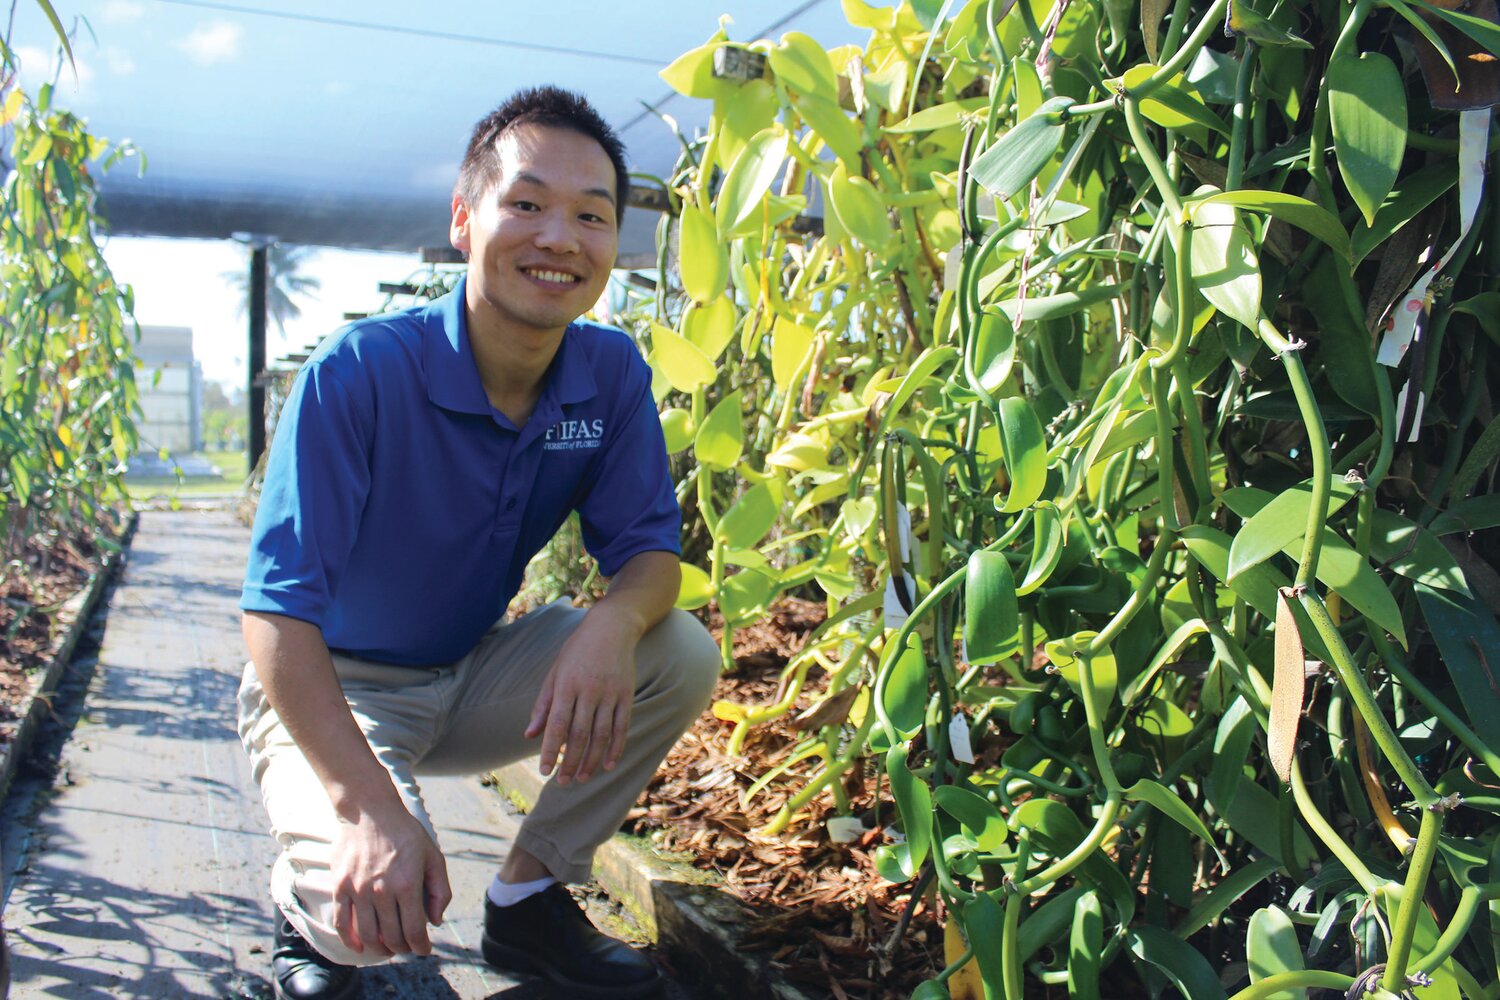 Xingbo Wu is a plant breeder and geneticist at the UF/IFAS Tropical Research and Education Center. The shade house contains thousands of yards of vanilla vines at the Homestead campus.